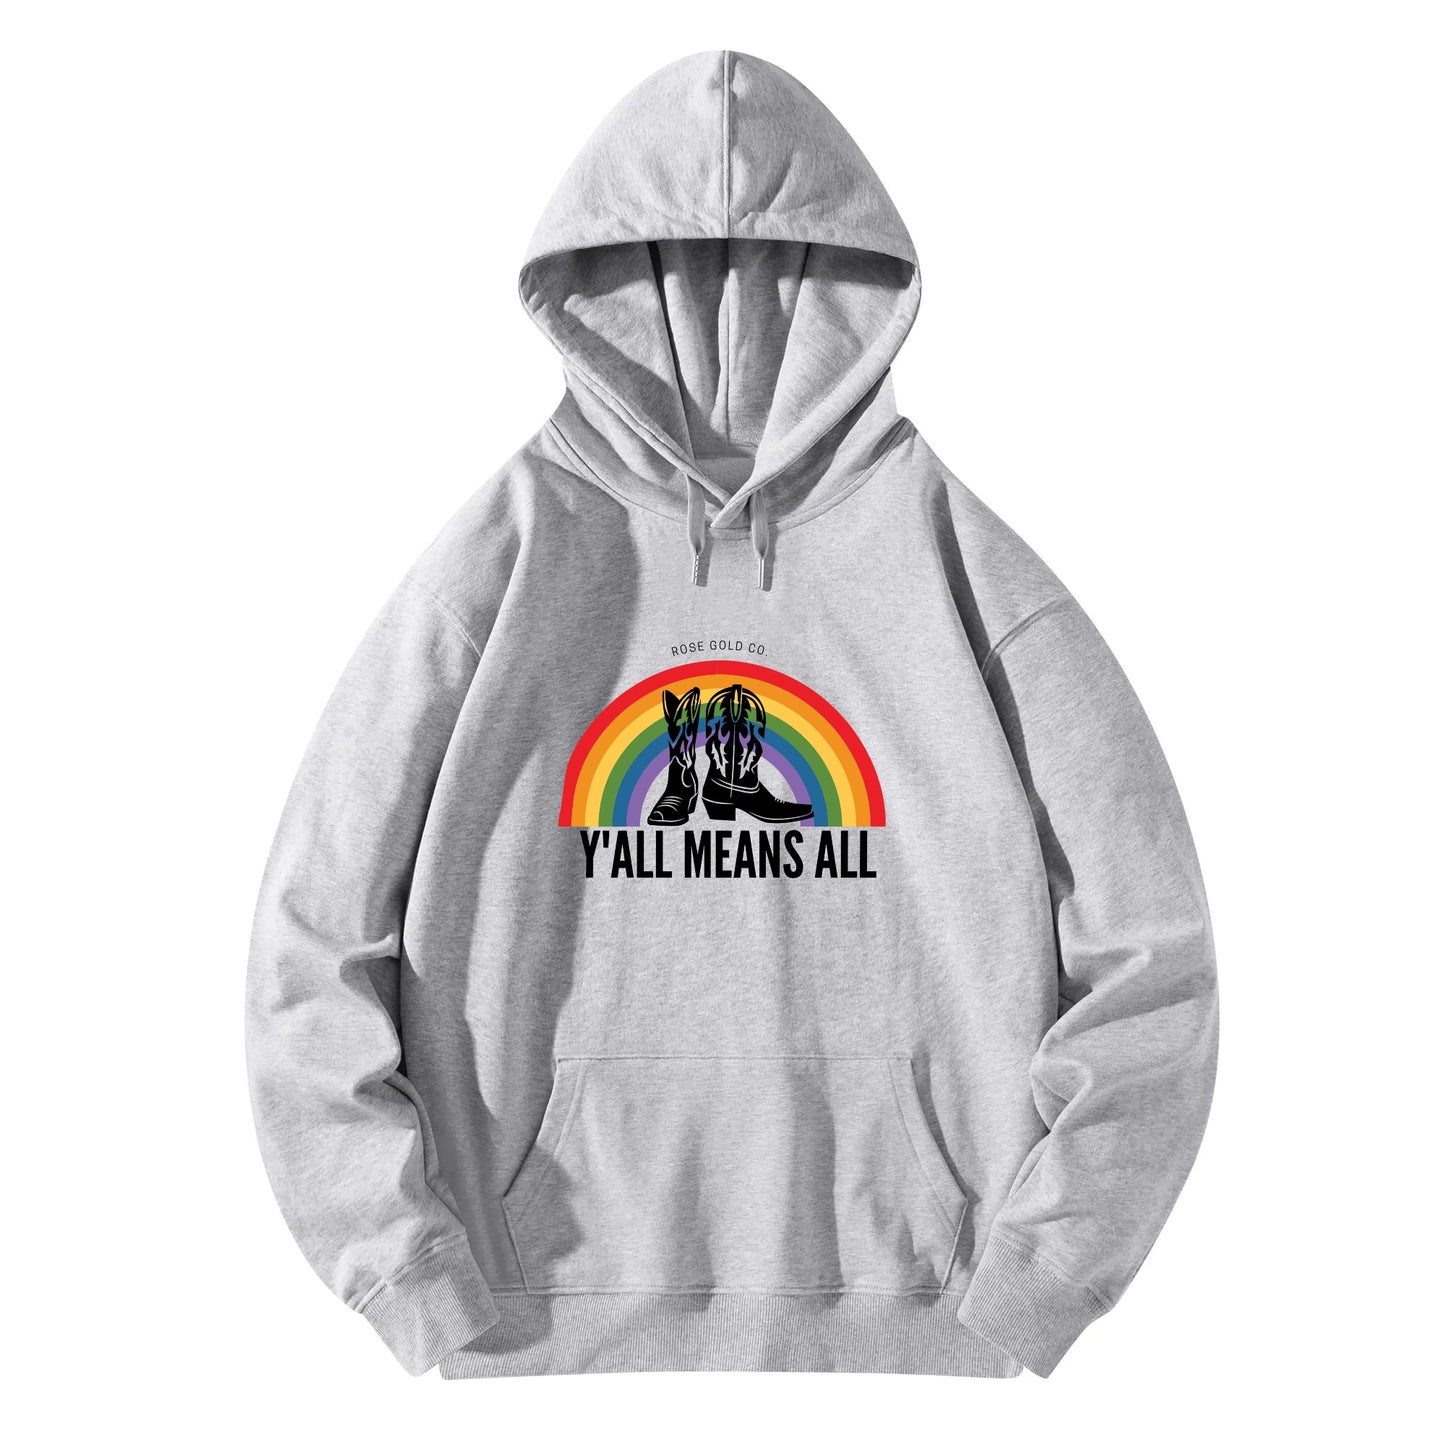 Yall Means All Unisex Hoodie - Rose Gold Co. Shop